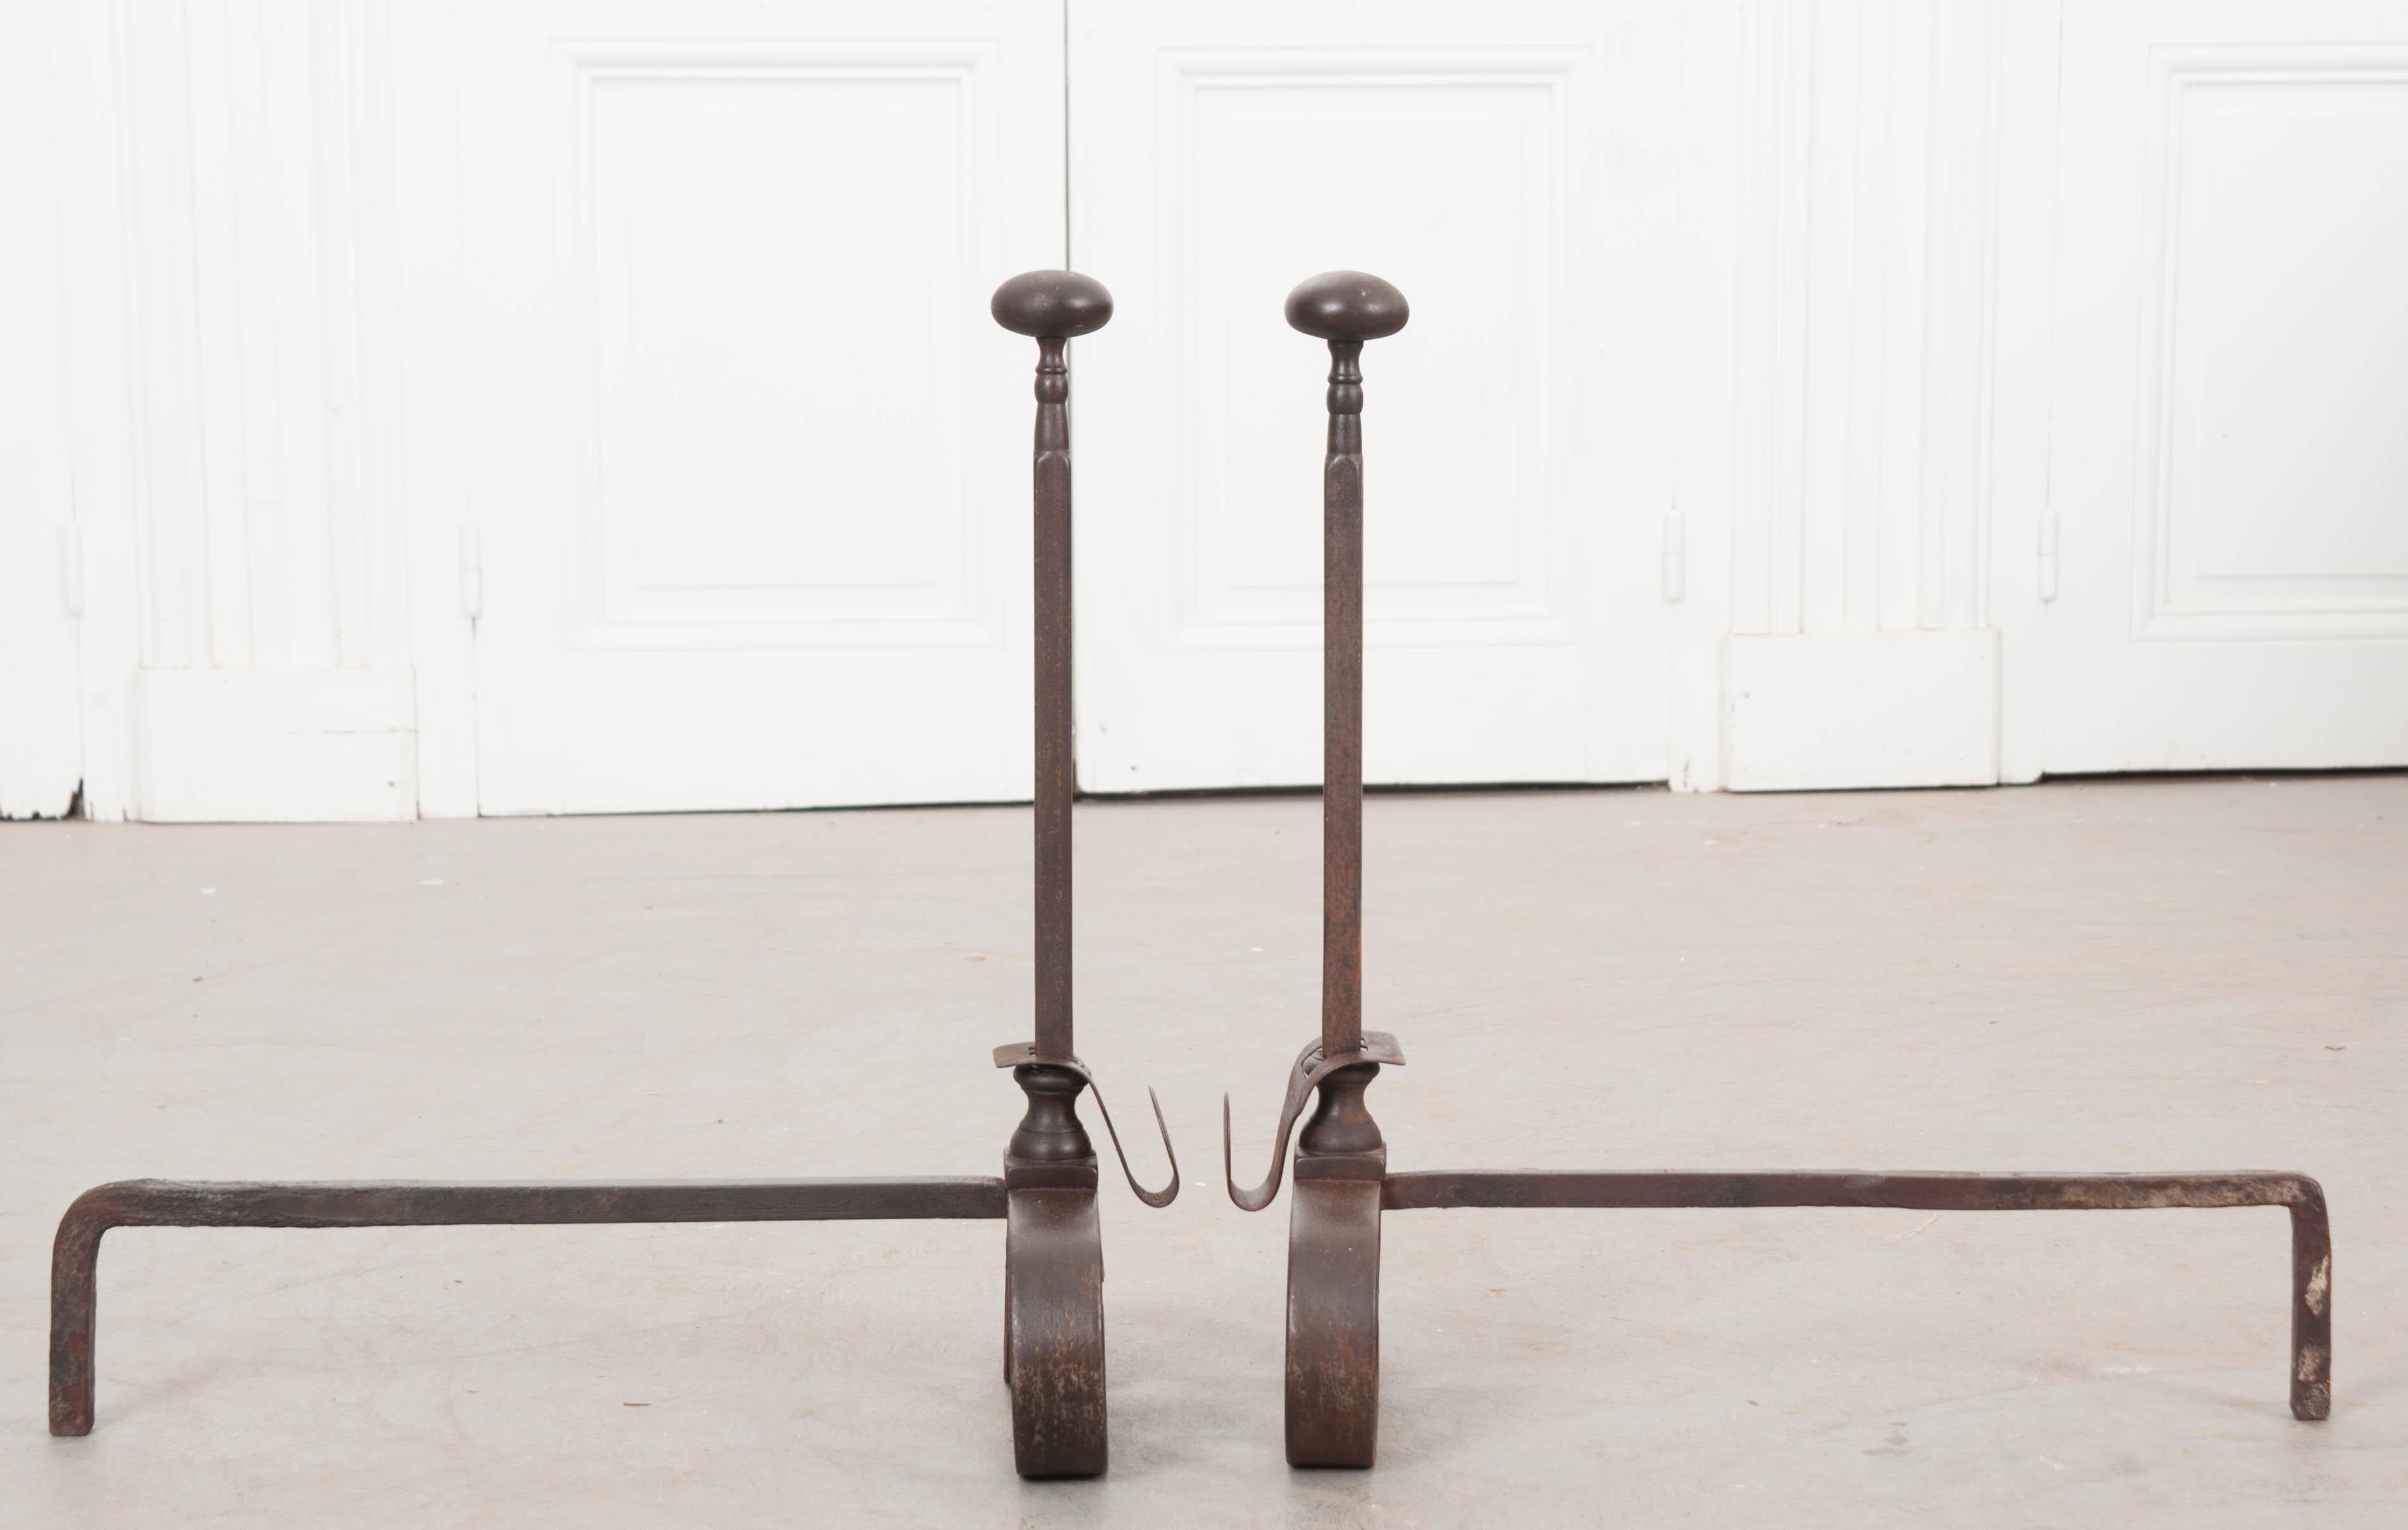 This fine and heavy pair of columnar iron andirons, circa 1850s, were made in France. The iron has taken on a lovely patina thanks to years of fires enjoyed by the previous owners. The design is conservative and Classic, with scrolled iron front